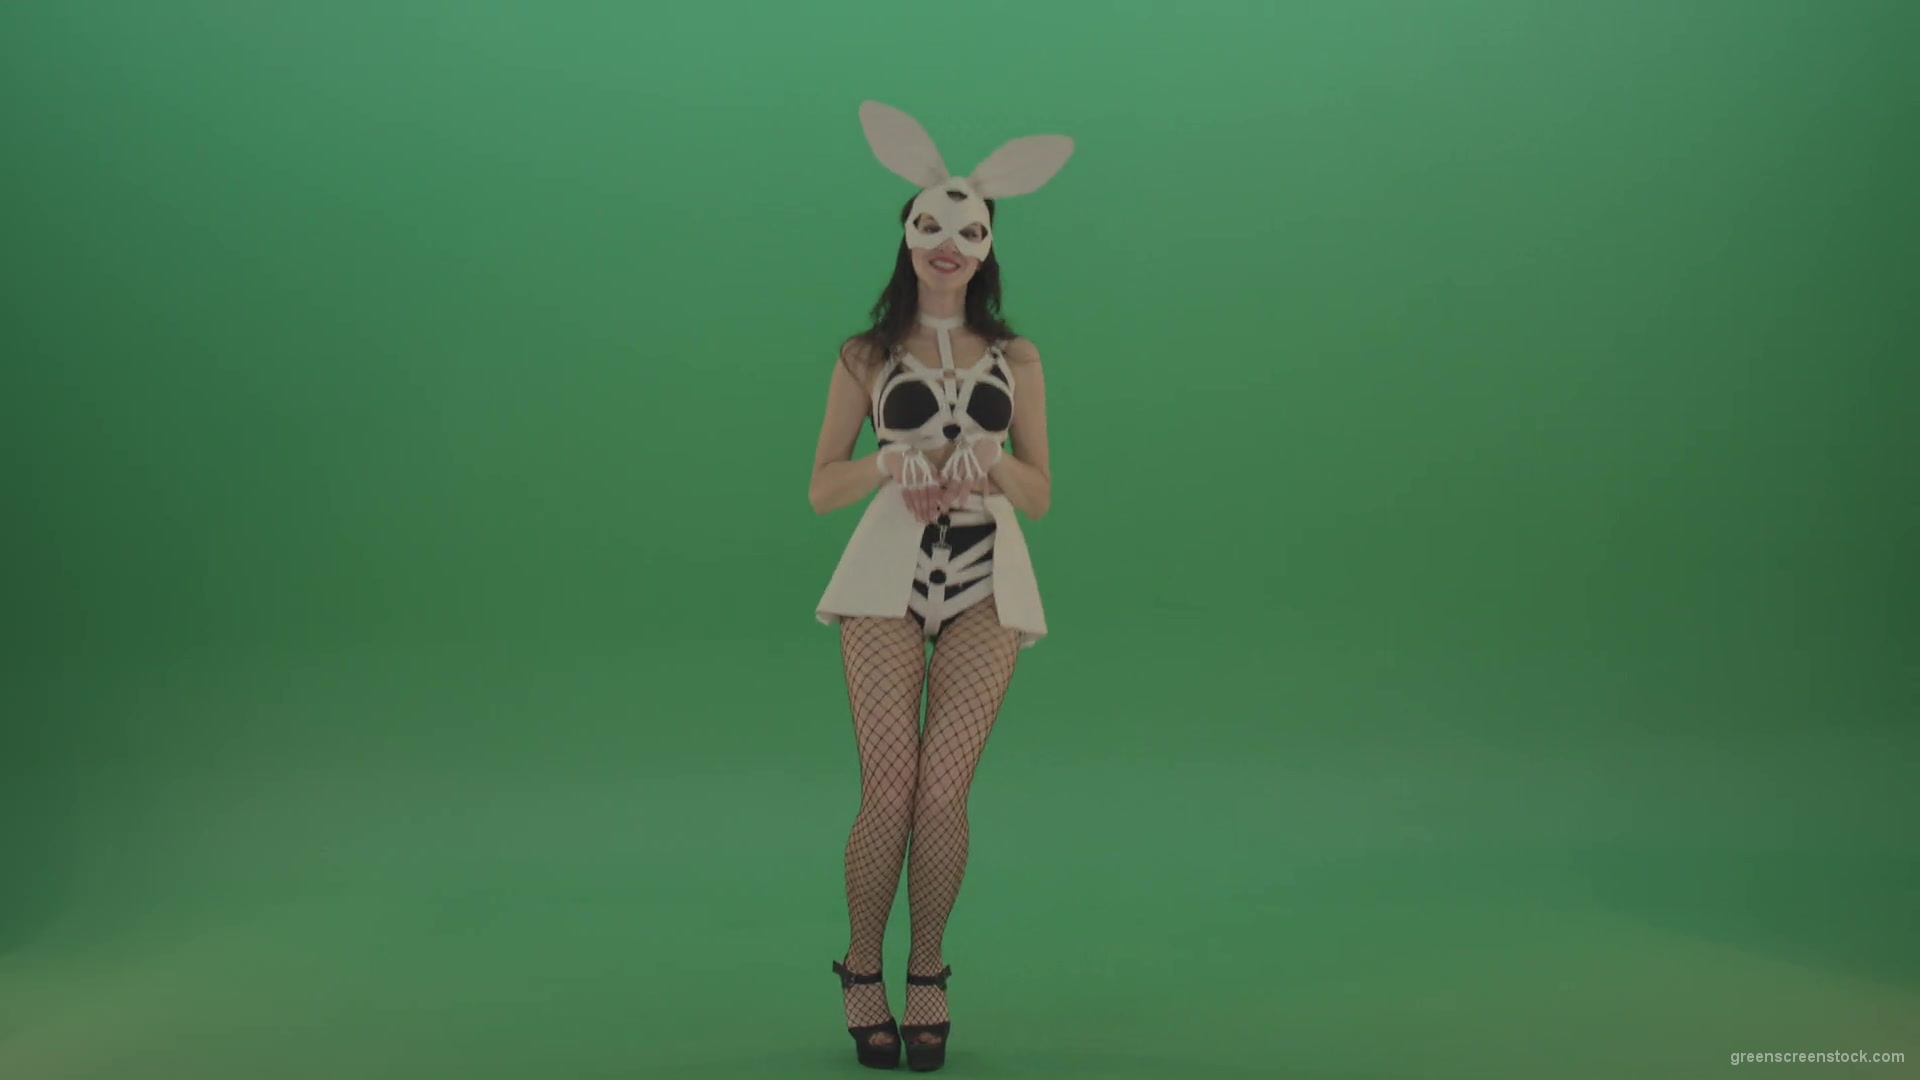 Happy-girl-dressed-in-rabbit-costume-for-adults-cyclically-jumping-in-different-directions-with-white-ears-on-chromakey-background-1920_008 Green Screen Stock